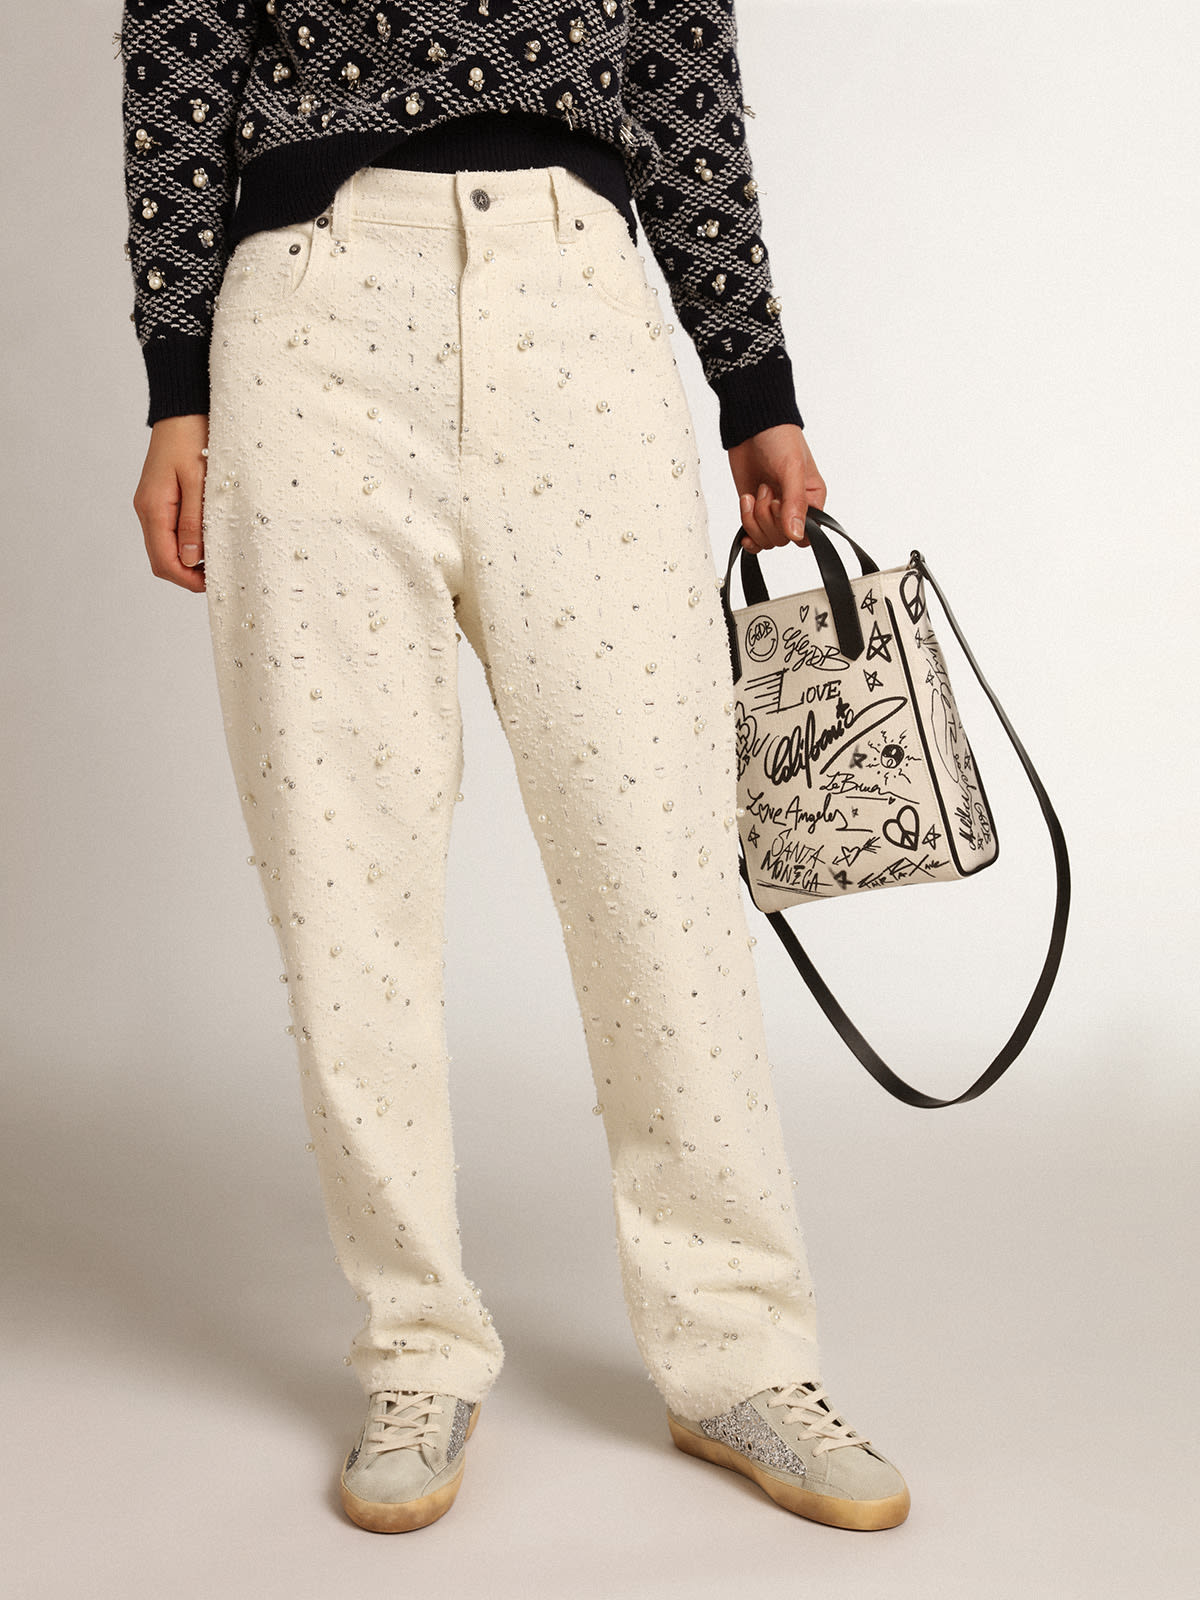 Golden Goose - Journey Collection Kim jeans in off-white cotton with diamond patterns and the addition of beads and crystals in 